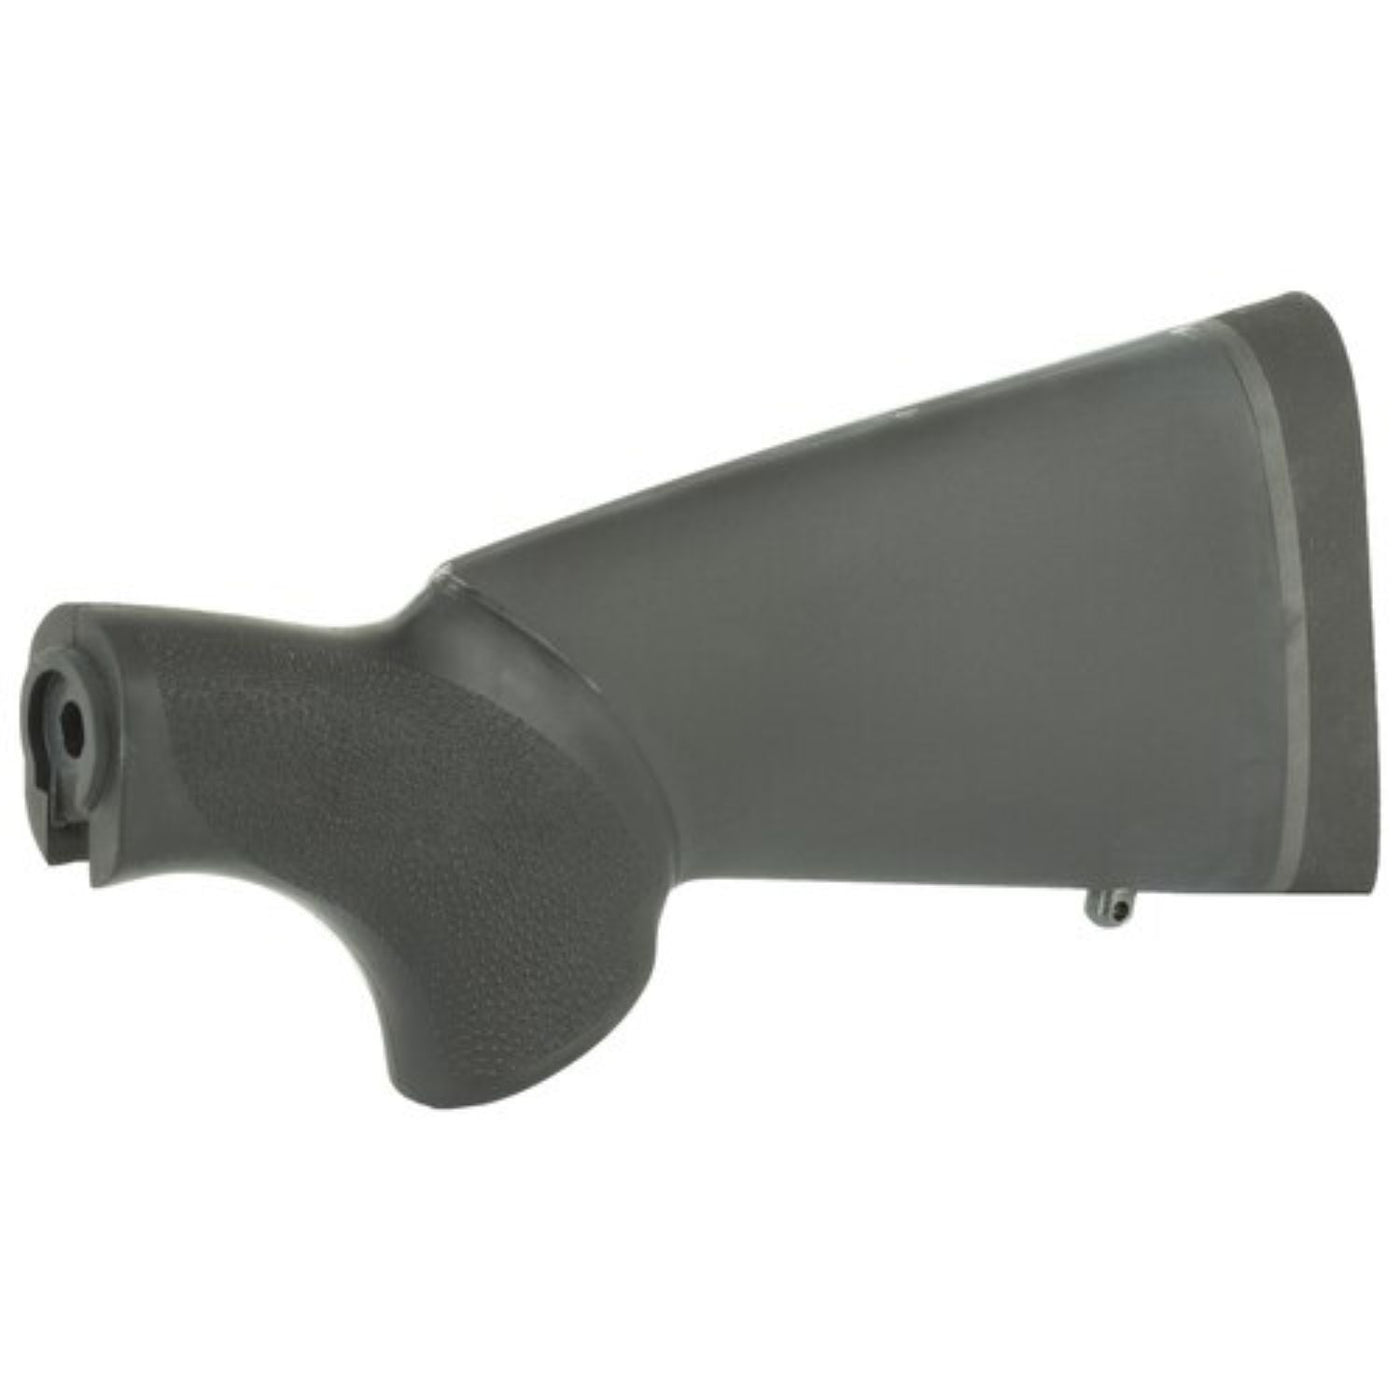 Hogue Mossberg 500 12 20 Gauge OverMolded Stock 12 in LOP